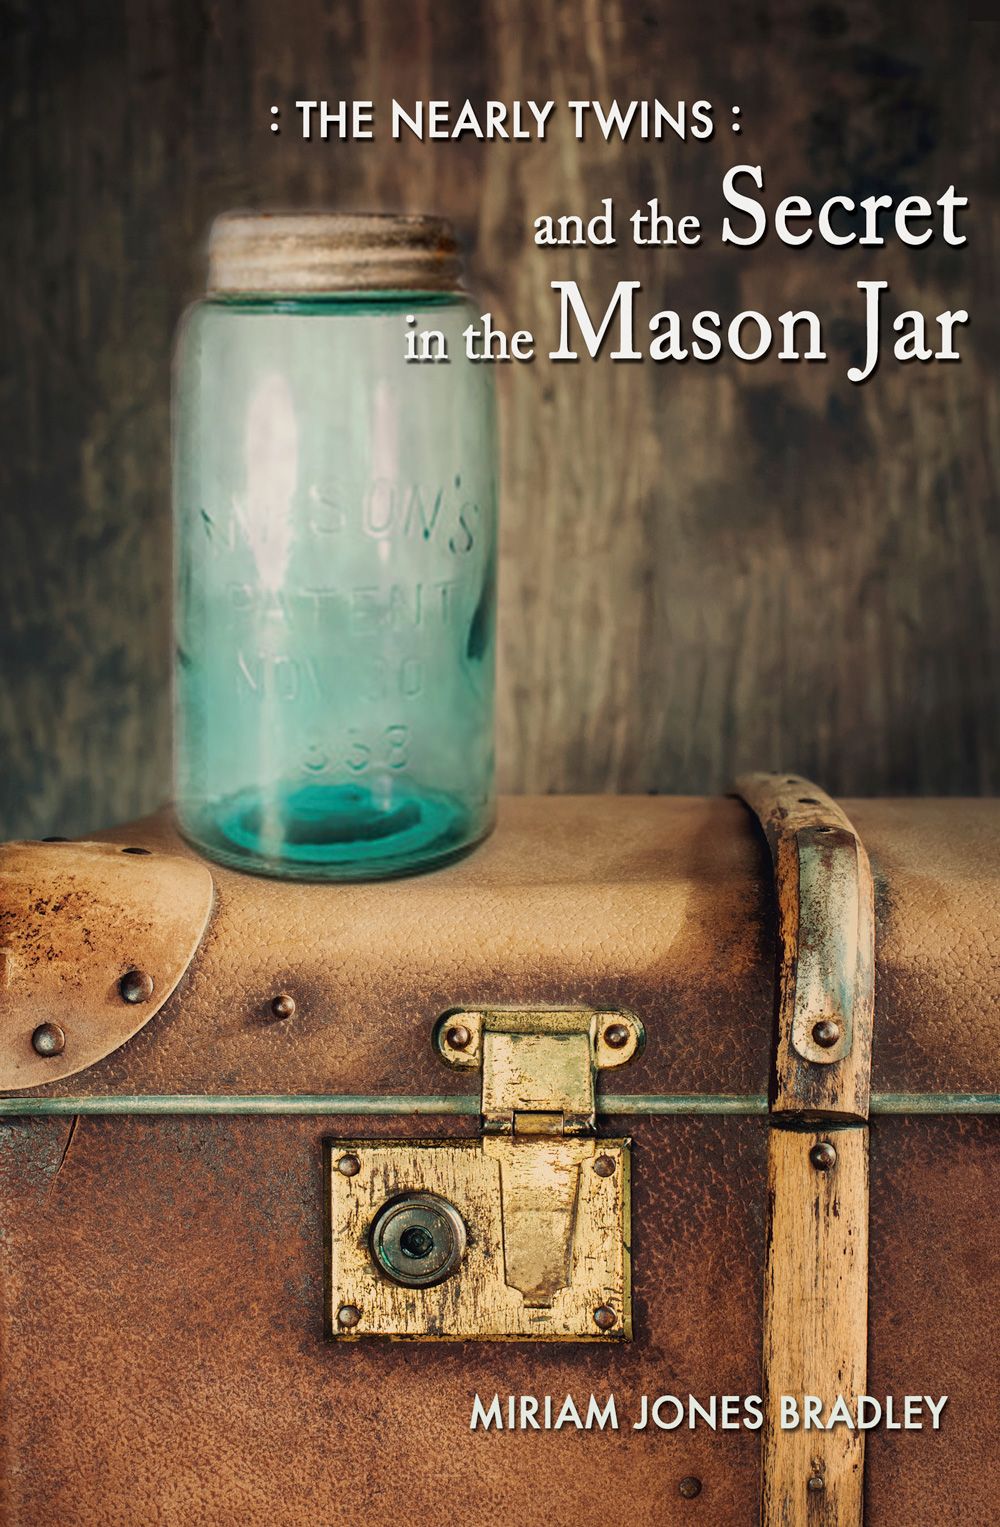 The Nearly Twins and the Secret in the Mason Jar 2016 by Miriam Jones Bradley - photo 1